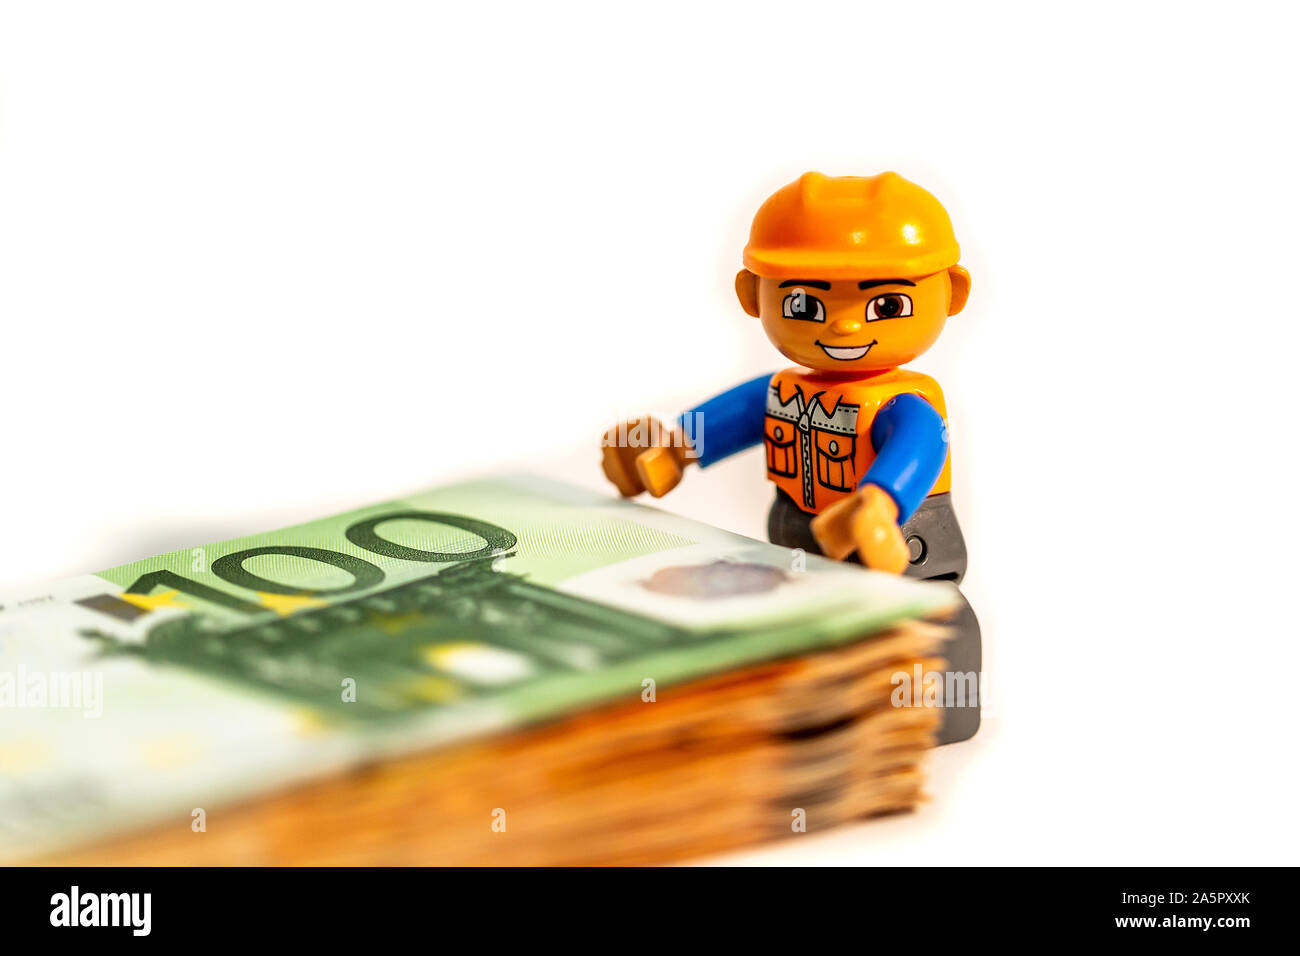 Minifigure toy worker model standing of a pilo of euro banknote, money. Lego minifigures are manufactured by the Lego Group Stock Photo